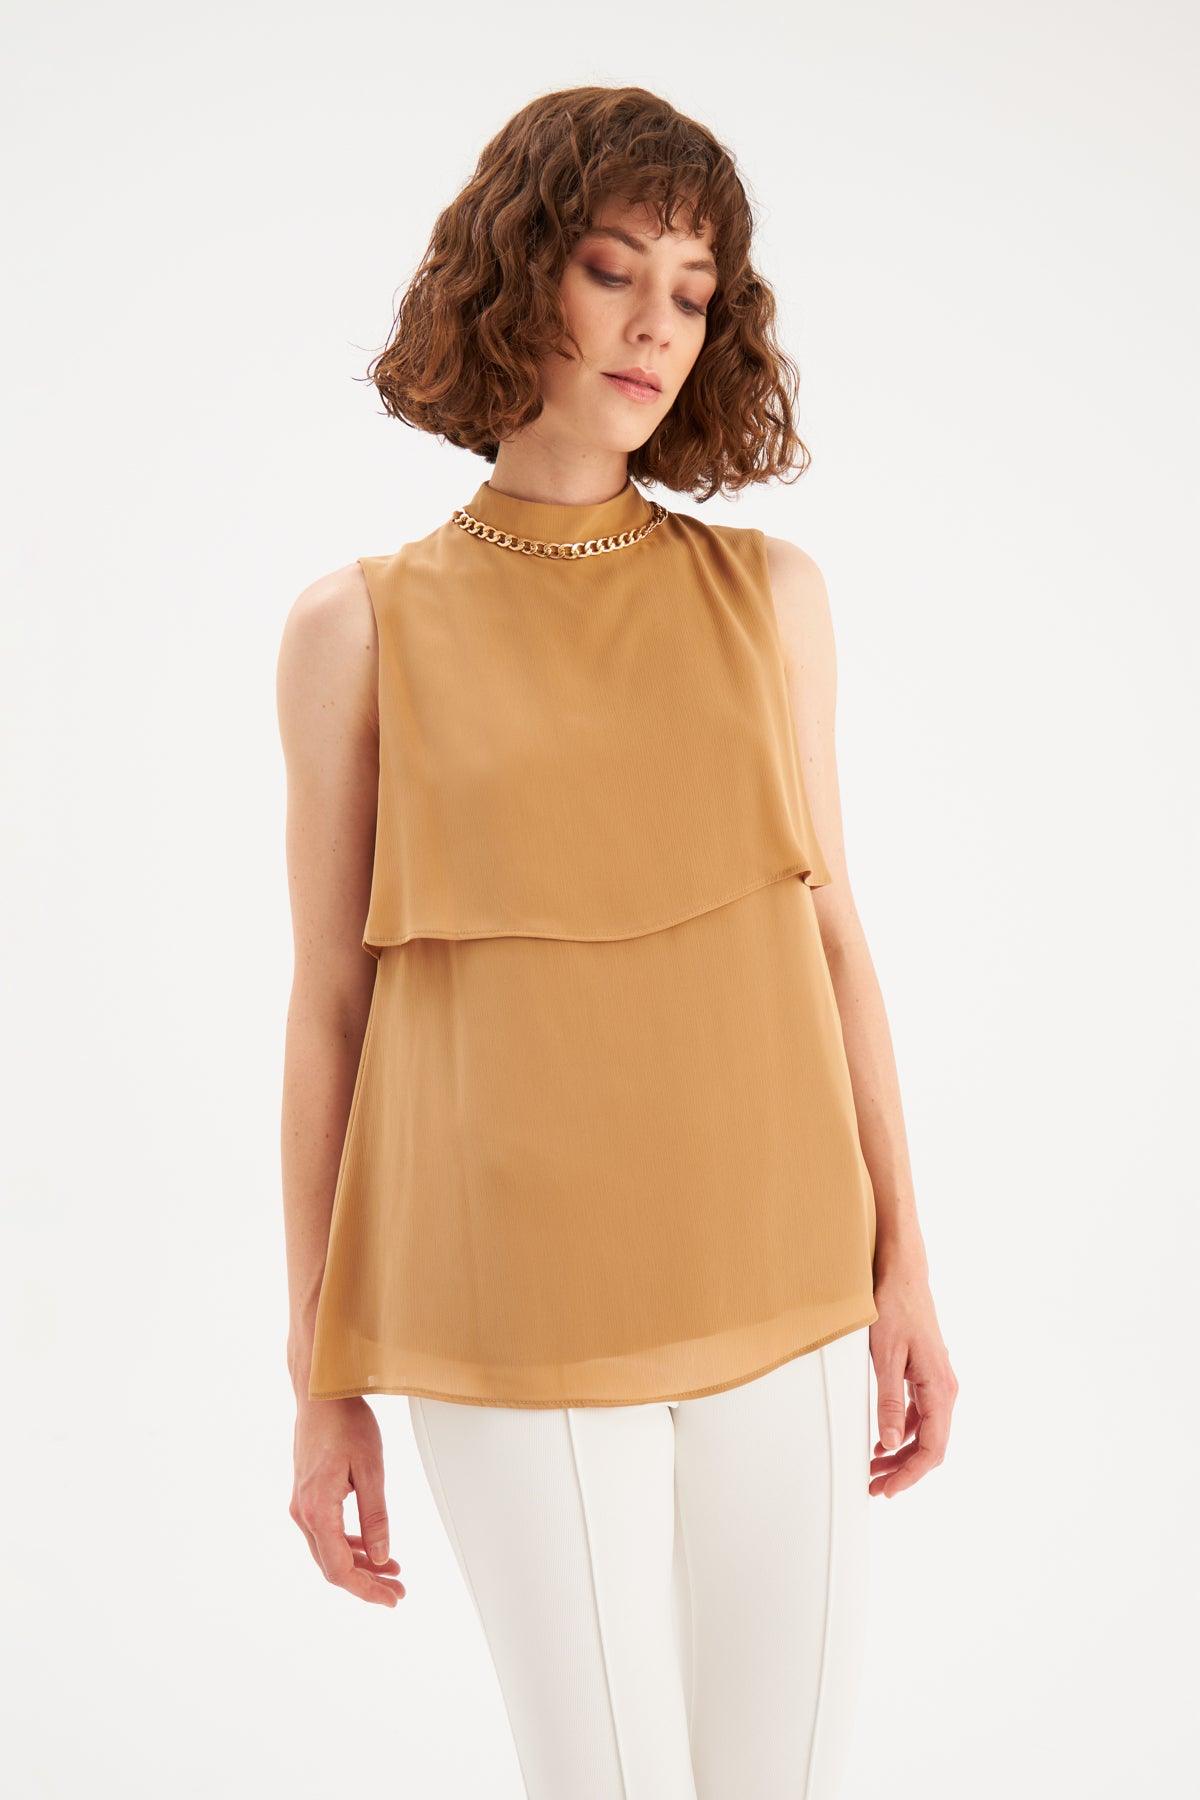 Accessory Detailed Ruffle Blouse Camel / S / 4 ZEFASH